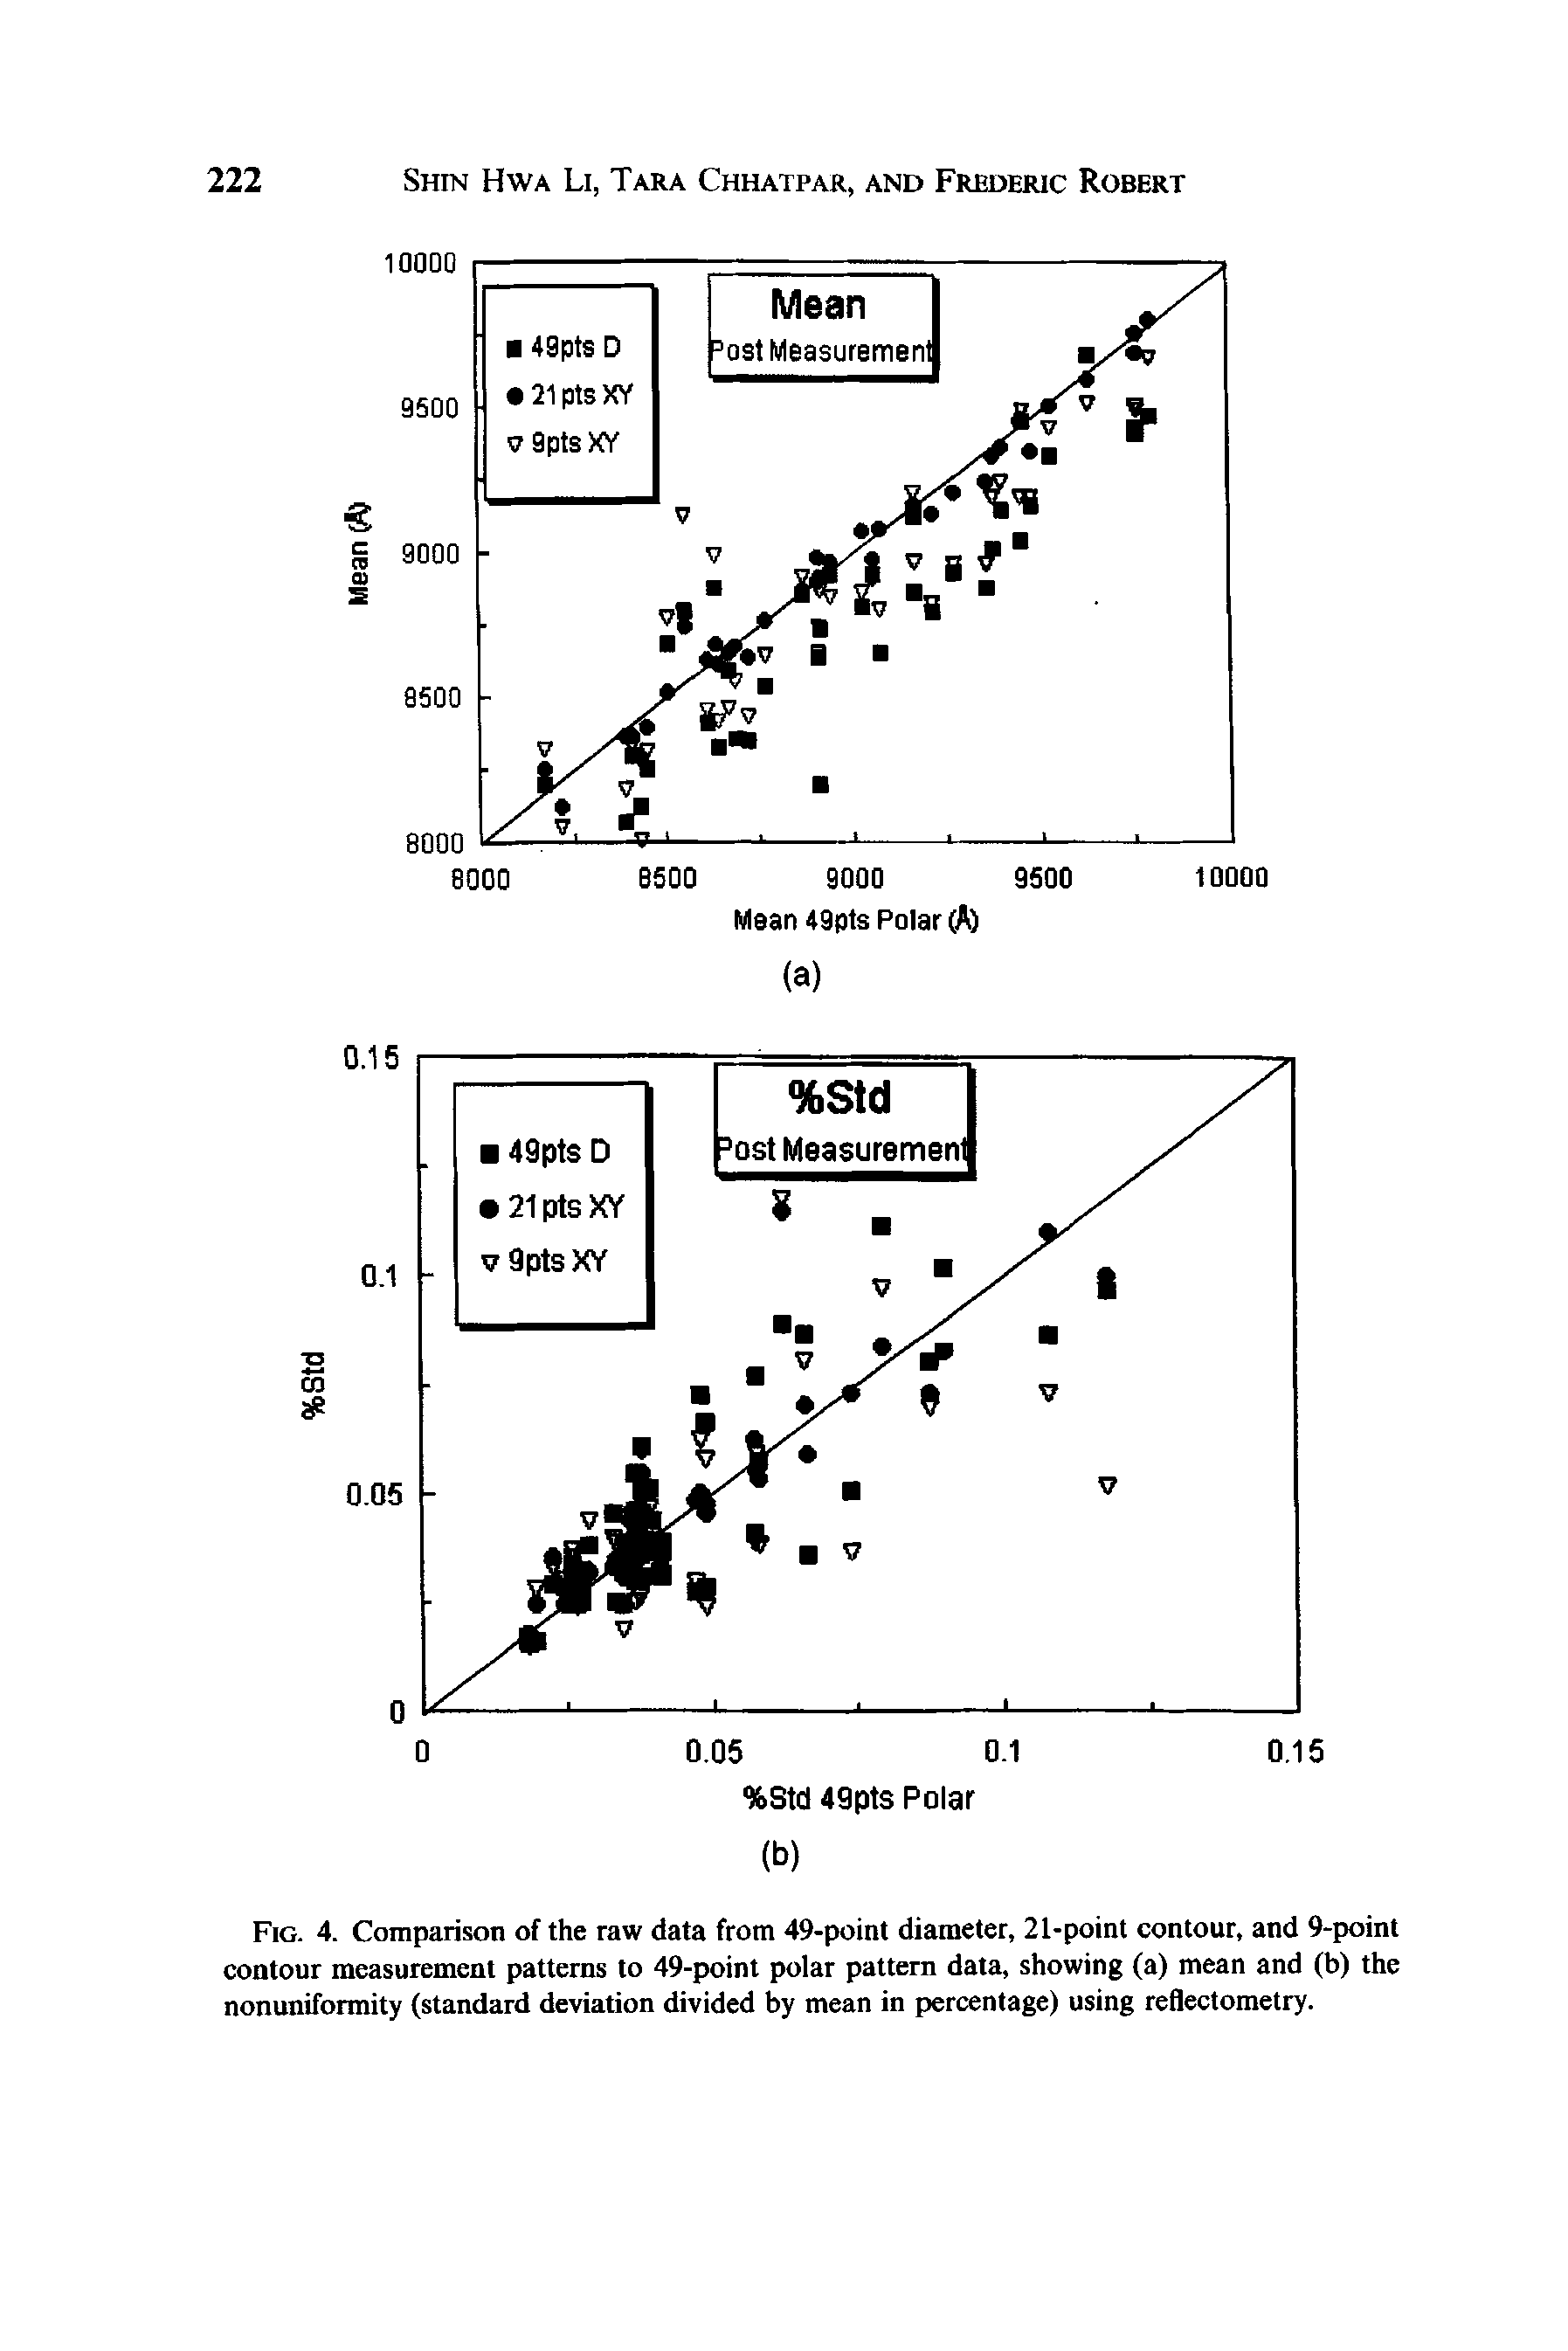 Fig. 4. Comparison of the raw data from 49-point diameter, 21-point contour, and 9-point contour measurement patterns to 49-point polar pattern data, showing (a) mean and (b) the nonuniformity (standard deviation divided by mean in percentage) using reflectometry.